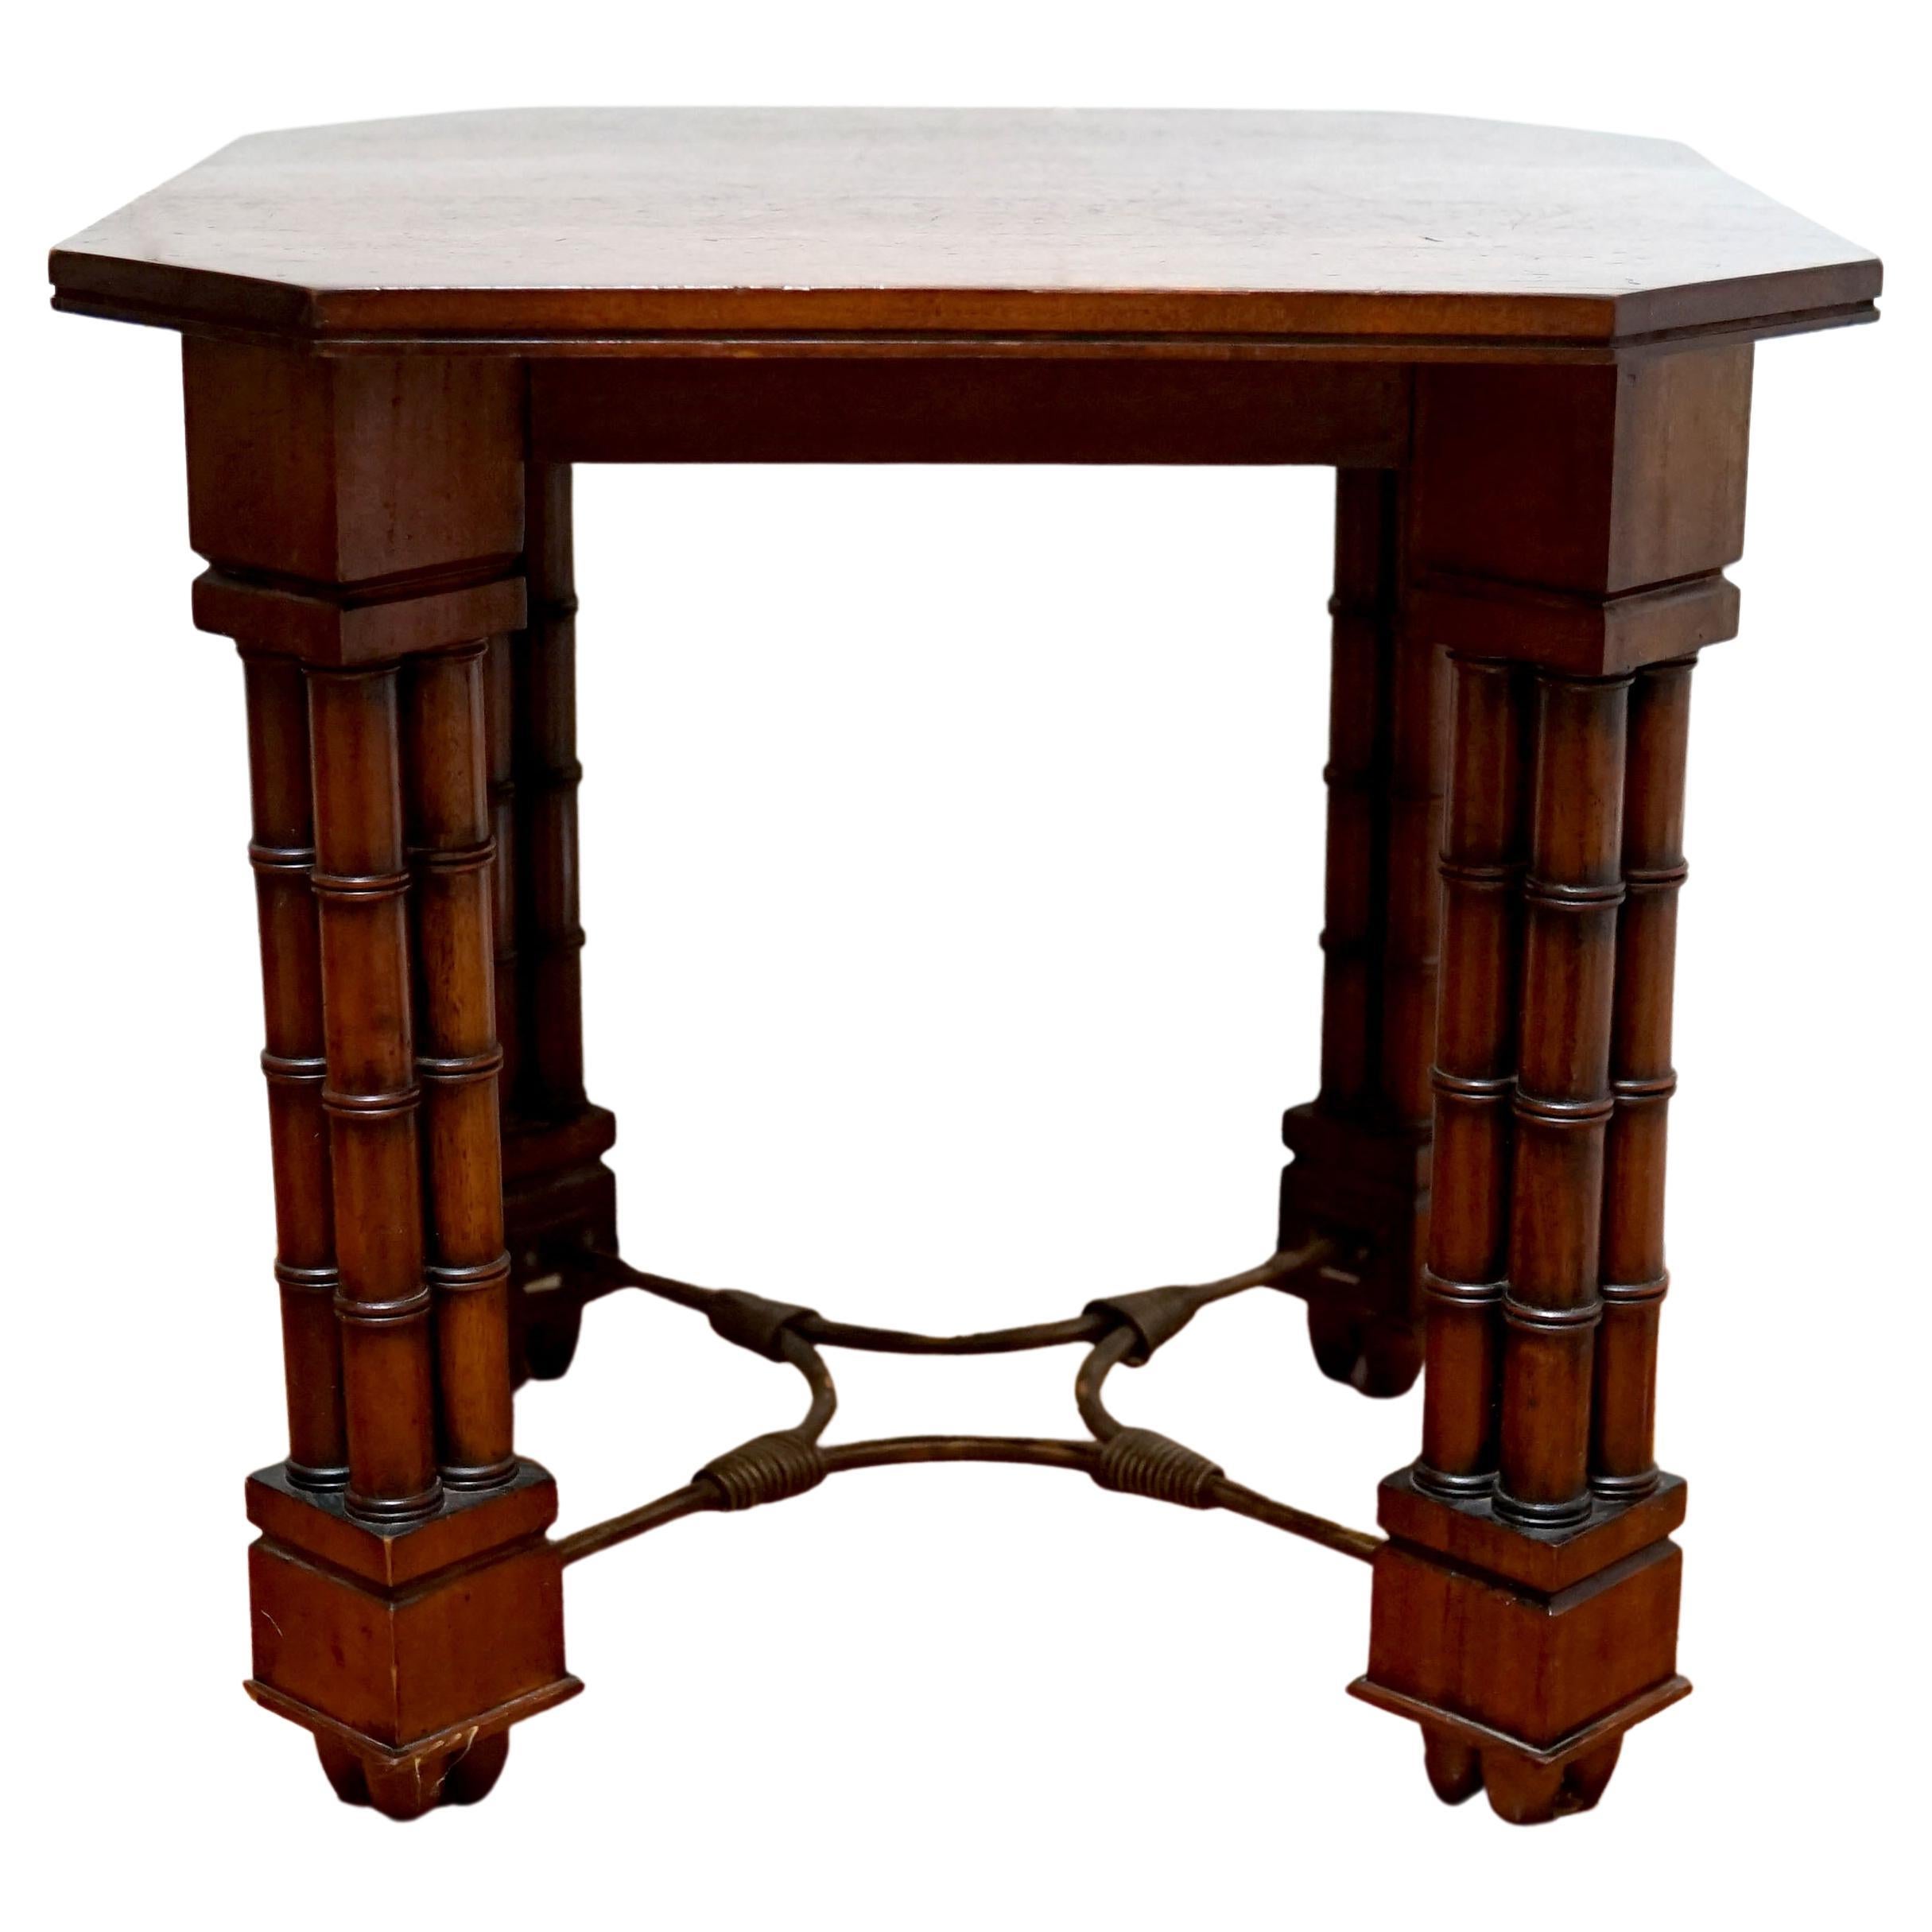 19th Century Mahogany Regency Style Octoganal Side Table For Sale